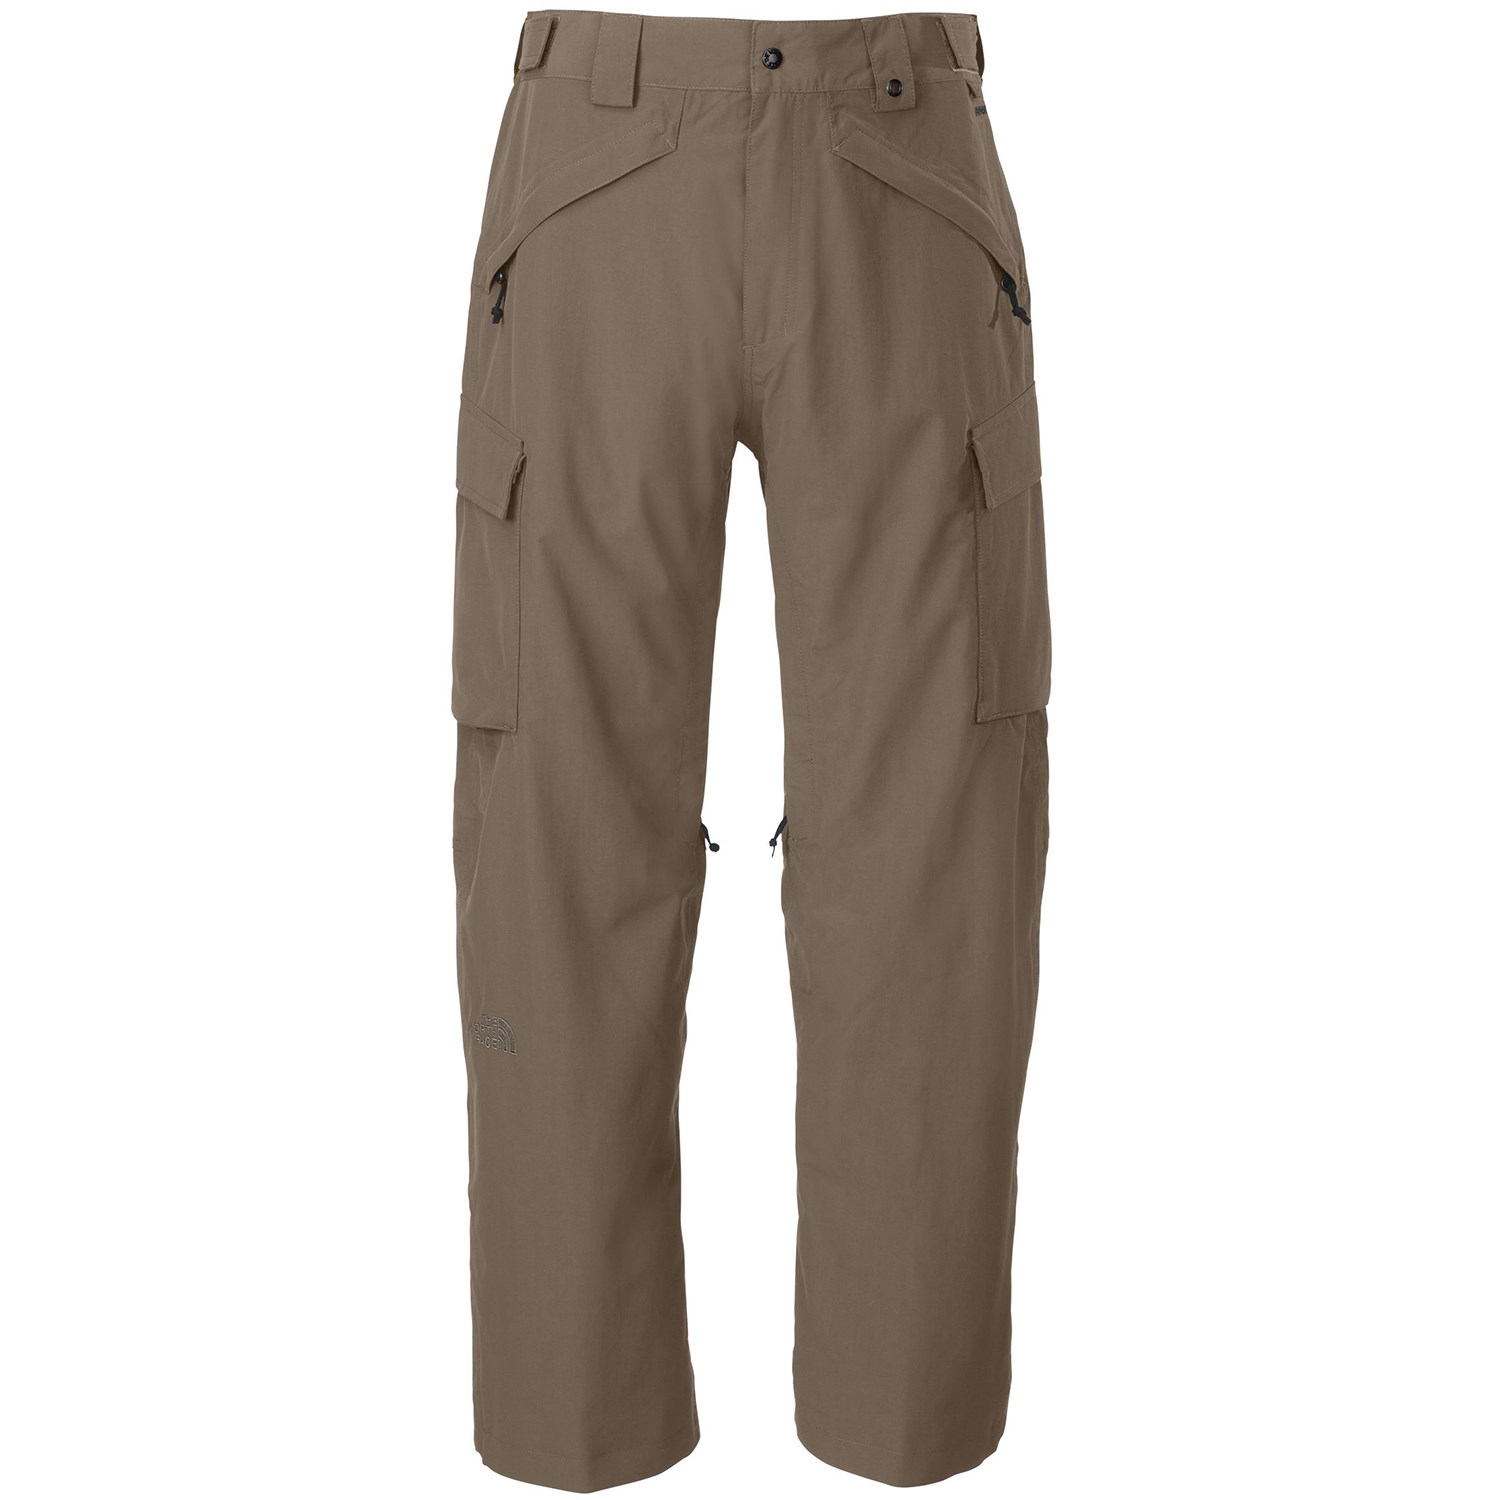 north face gore tex trousers sale 